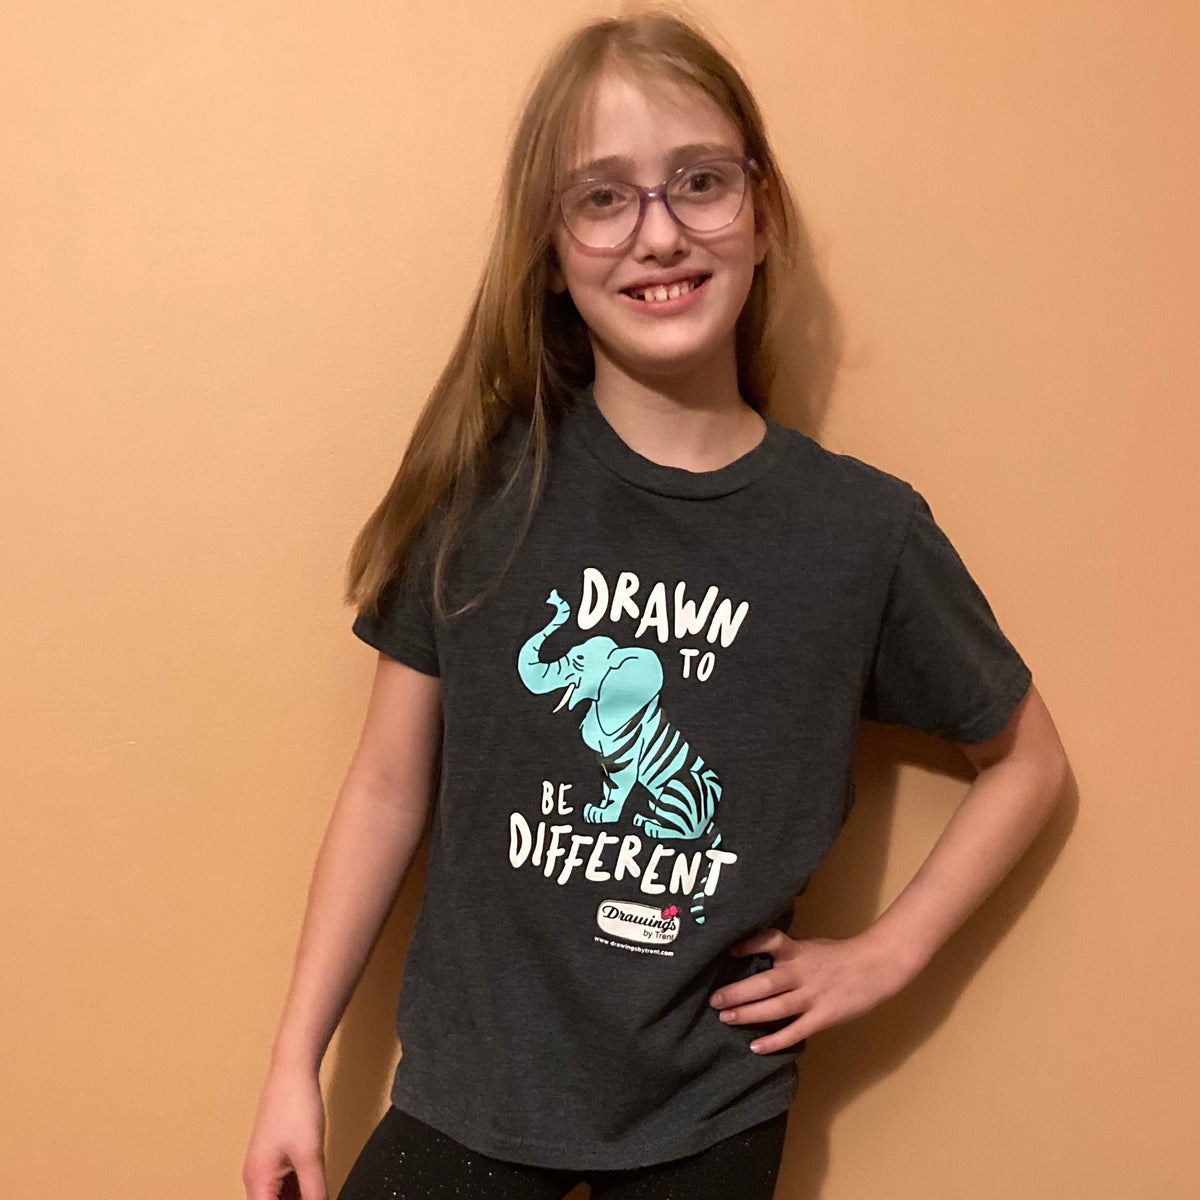 Drawn to be Different Youth T-Shirt